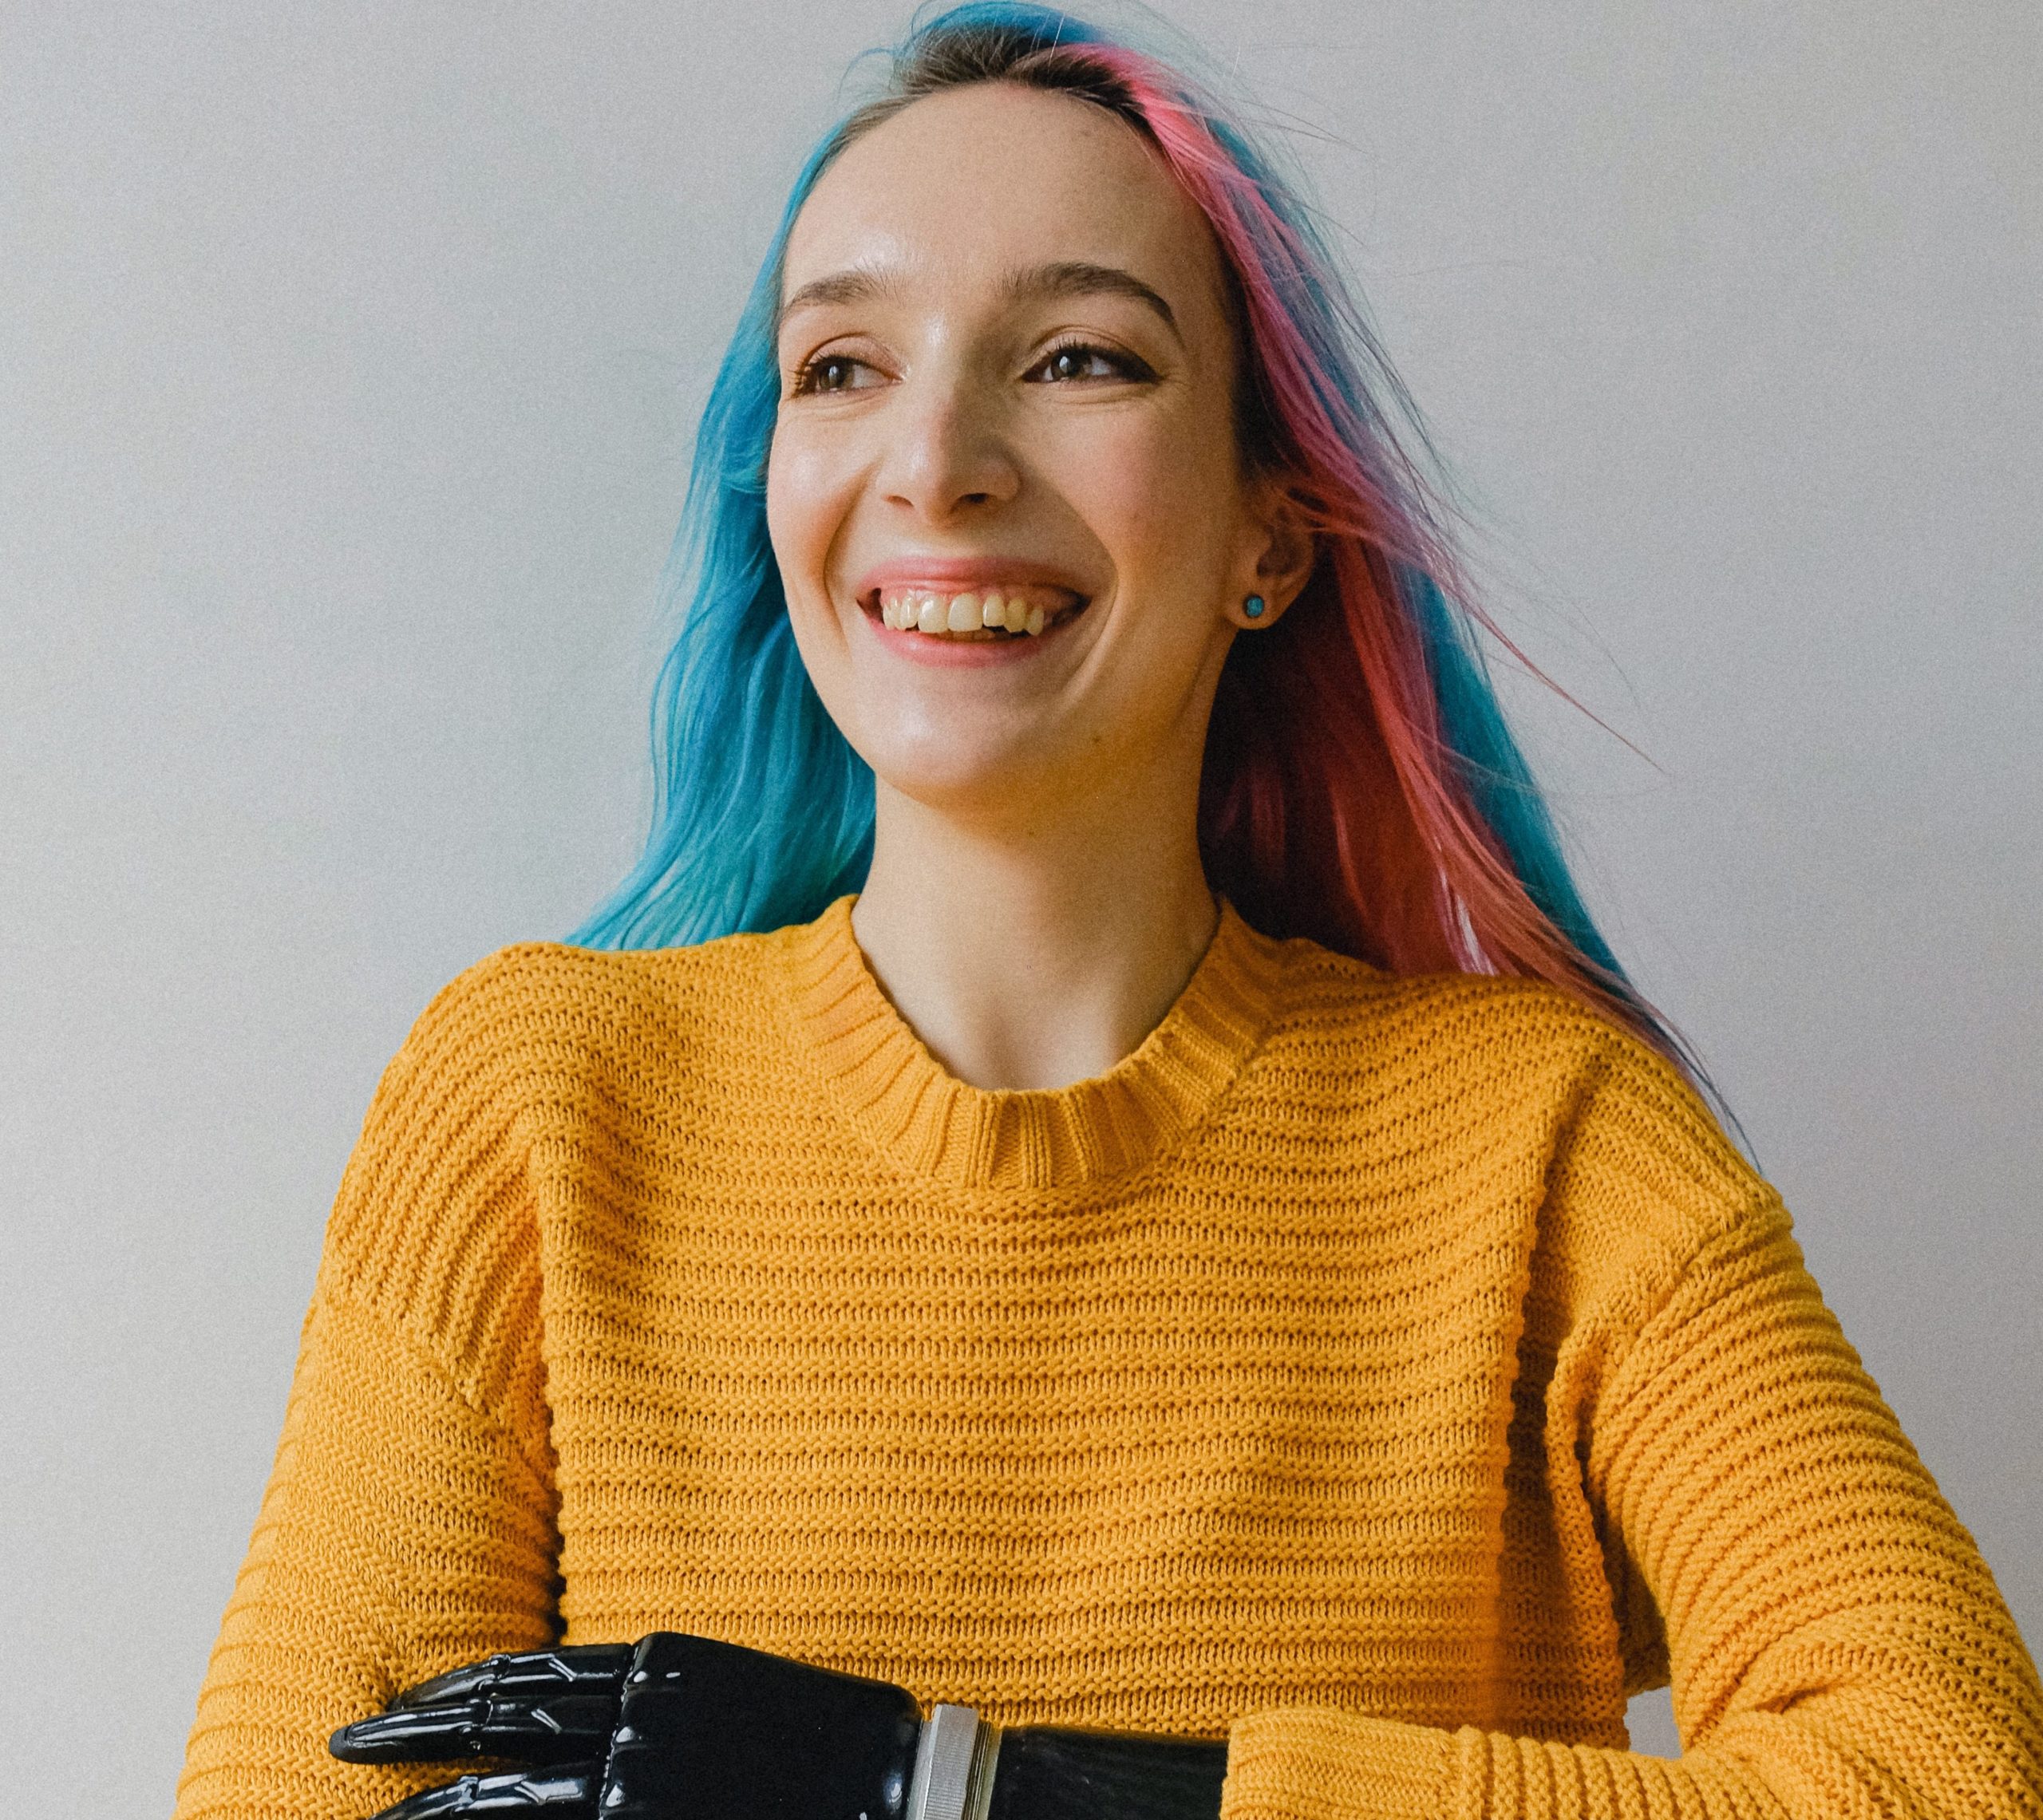 Young woman with prosthetic arm with brightly coloured sweater and hair